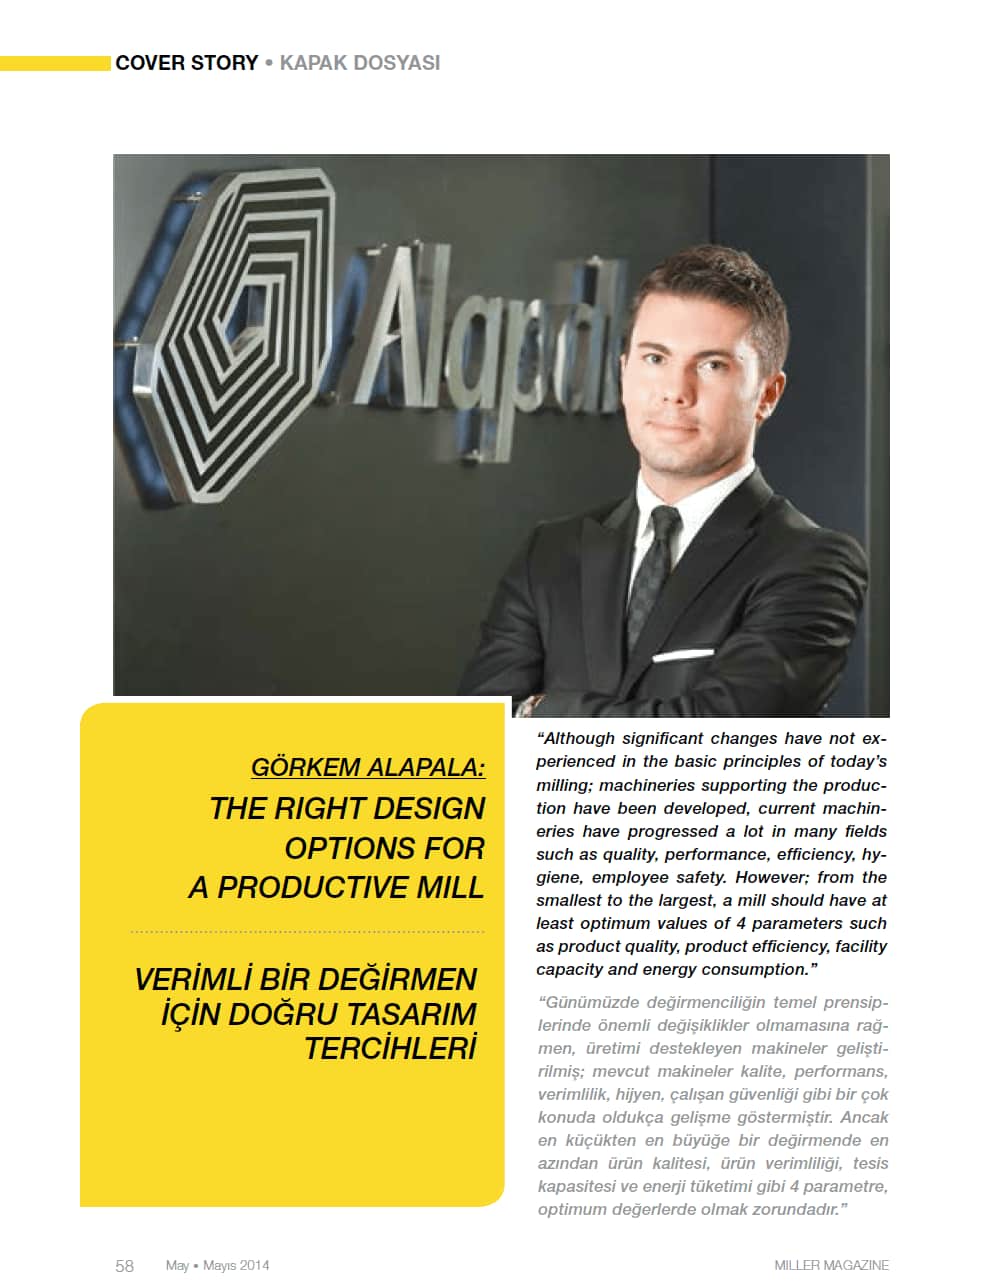 The Right Design Options For A Productive Mill: Görkem Alapala Interview On Miller Magazine